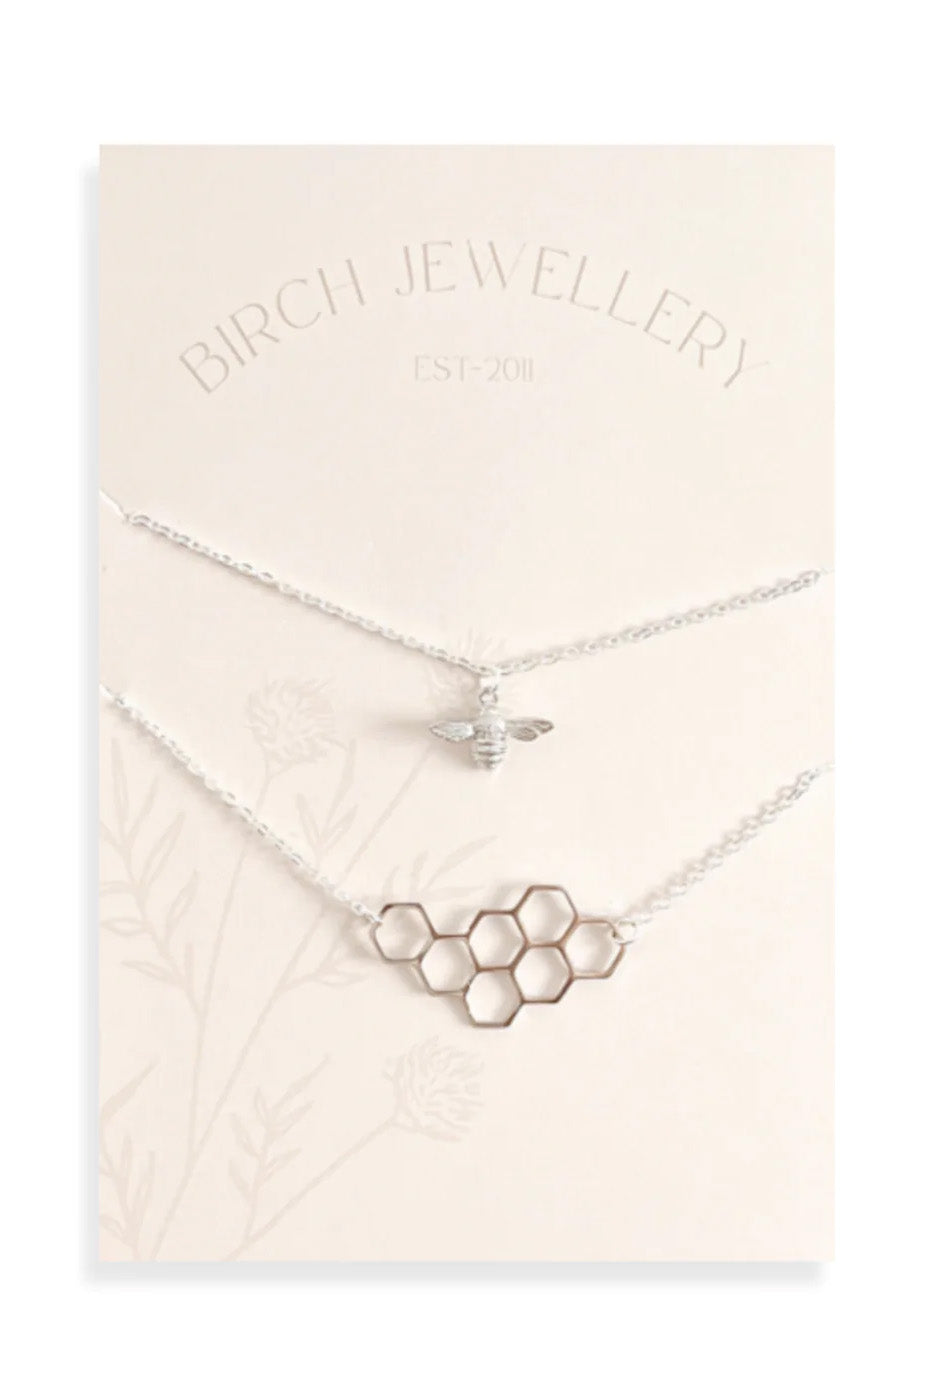 Bee and Honeycomb Layering Set by Birch Jewellery, Silver, made in Ottawa